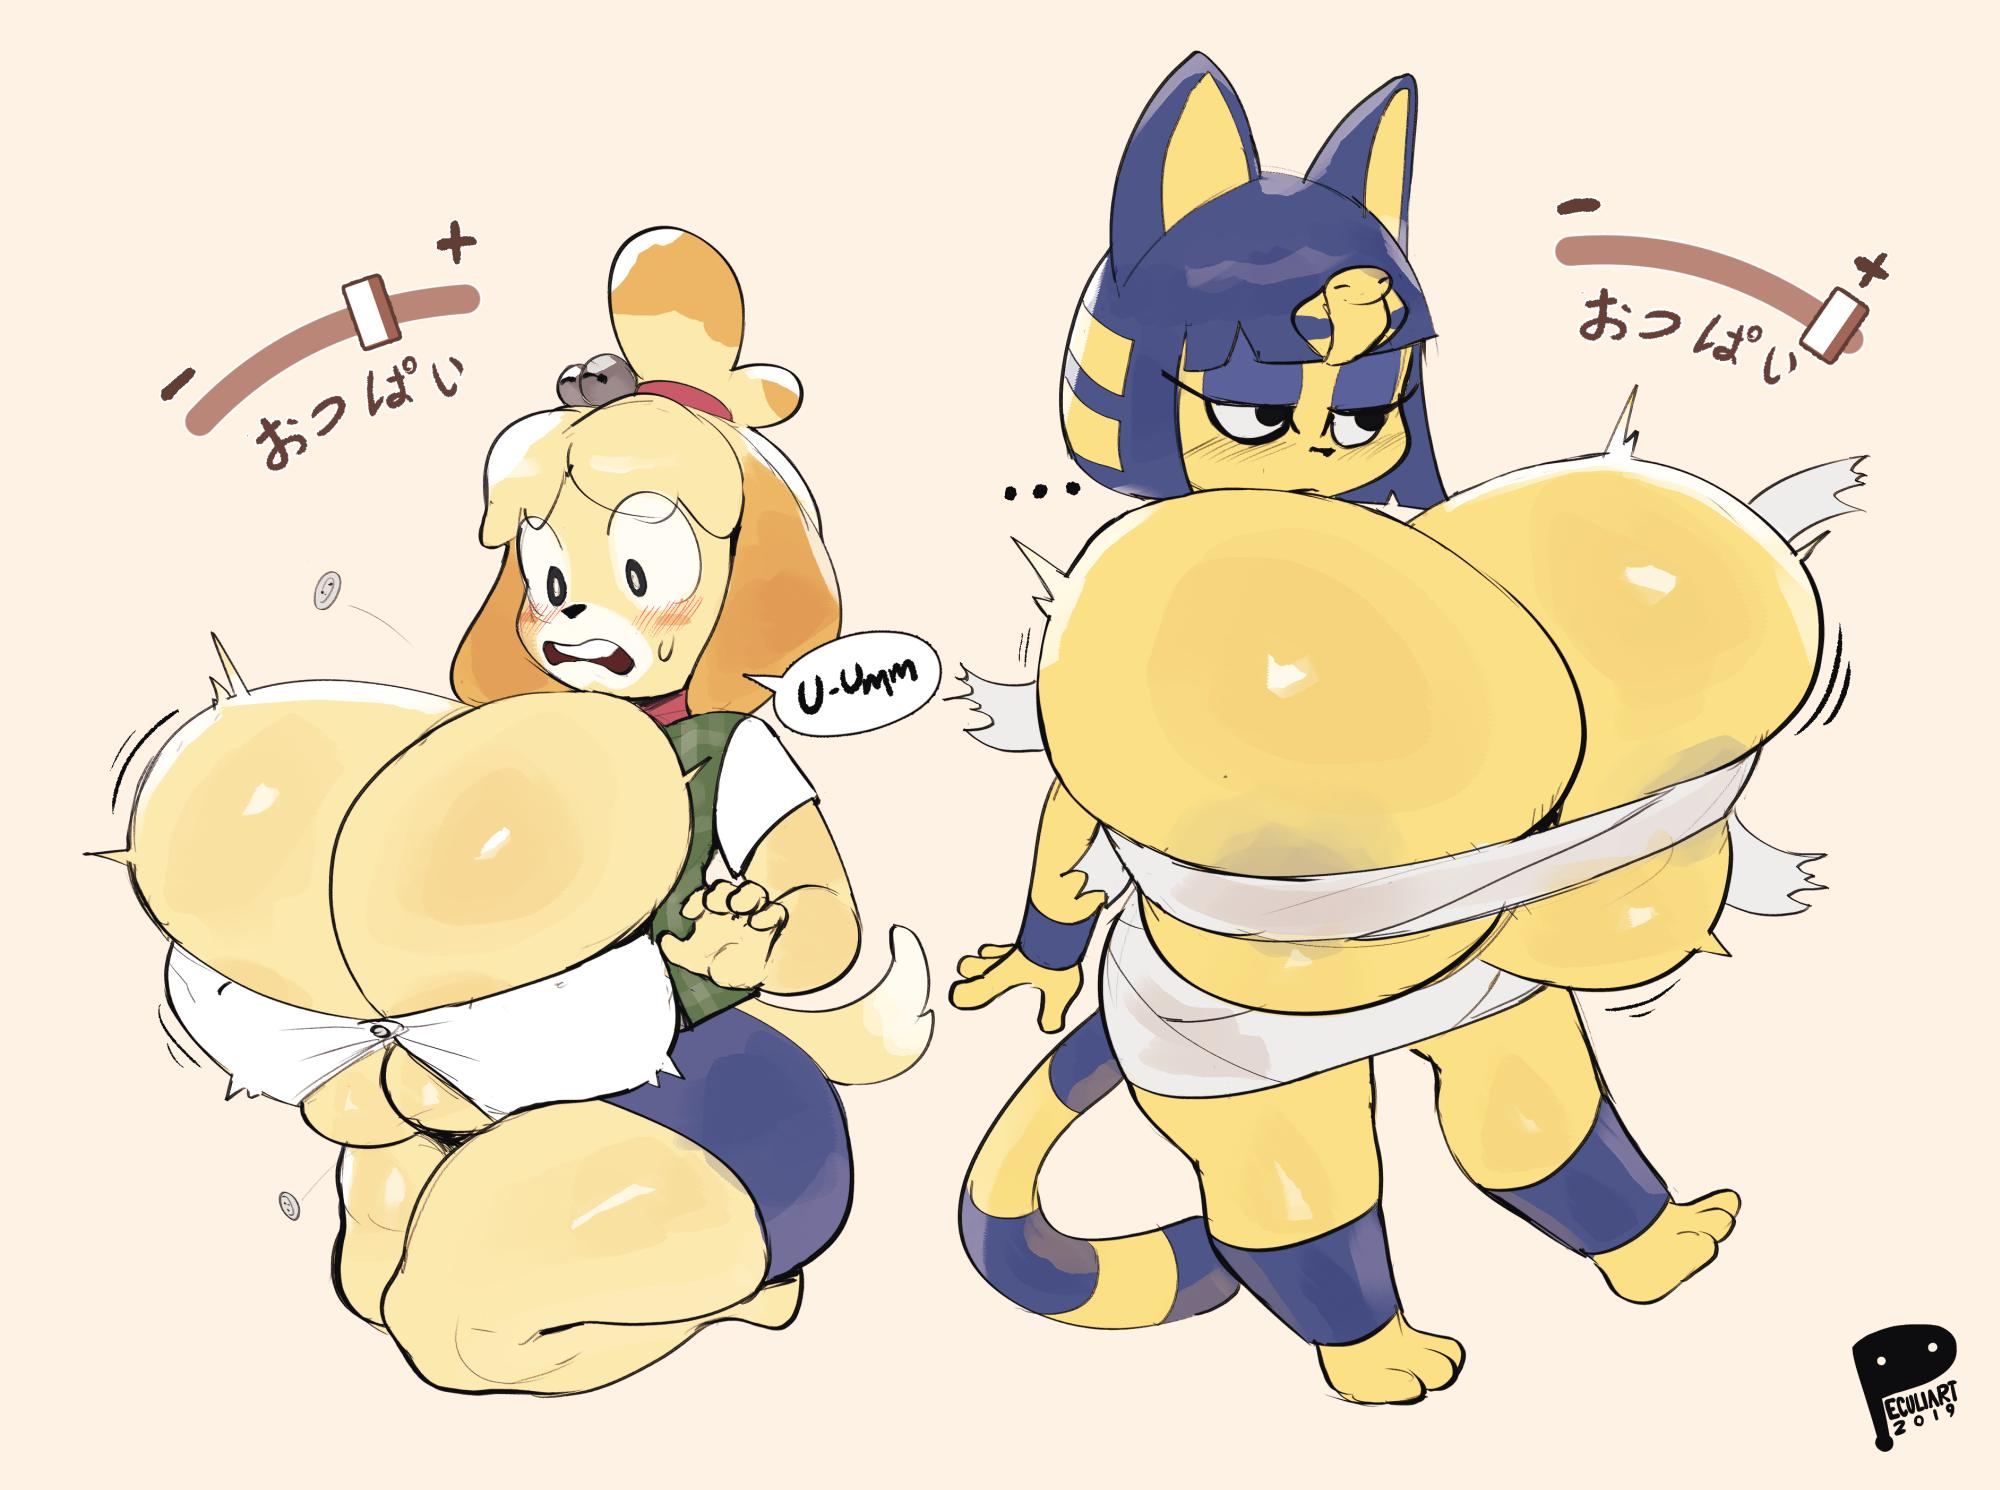 Animal crossing breast expansion